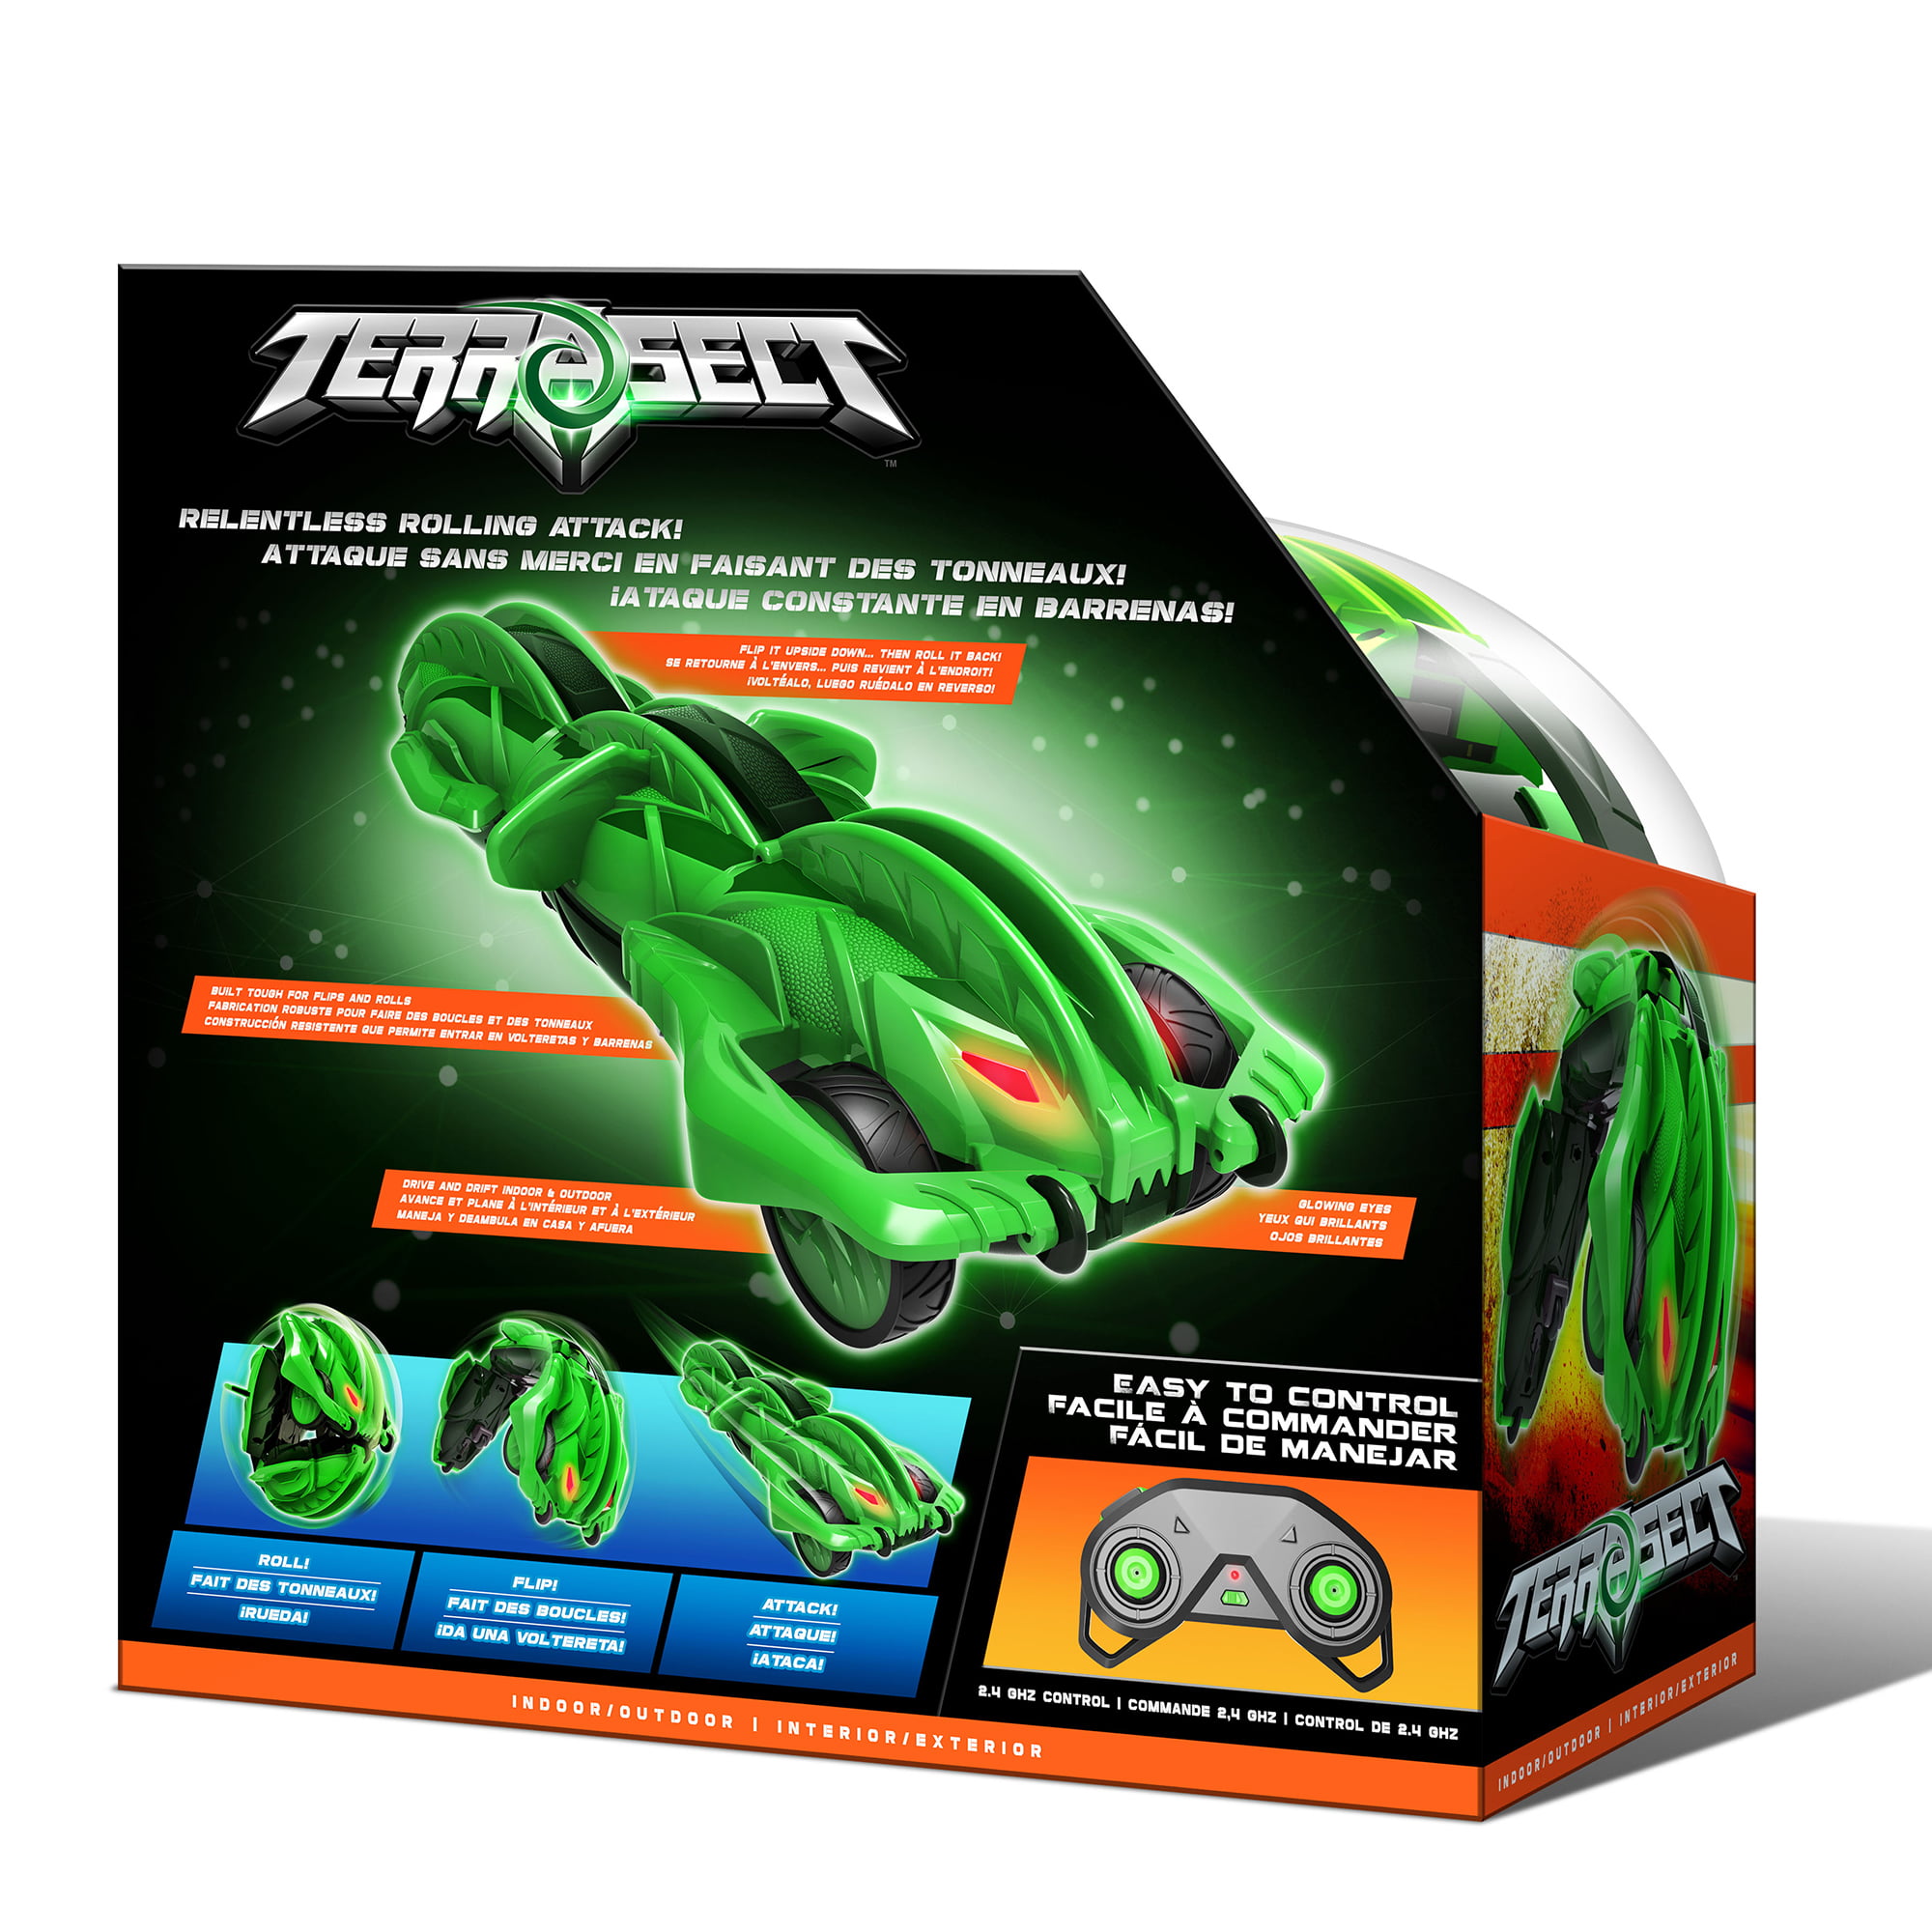 Drone Force YW858320 TerrasectRemote Relentless Rolling Reptile35cm2.4